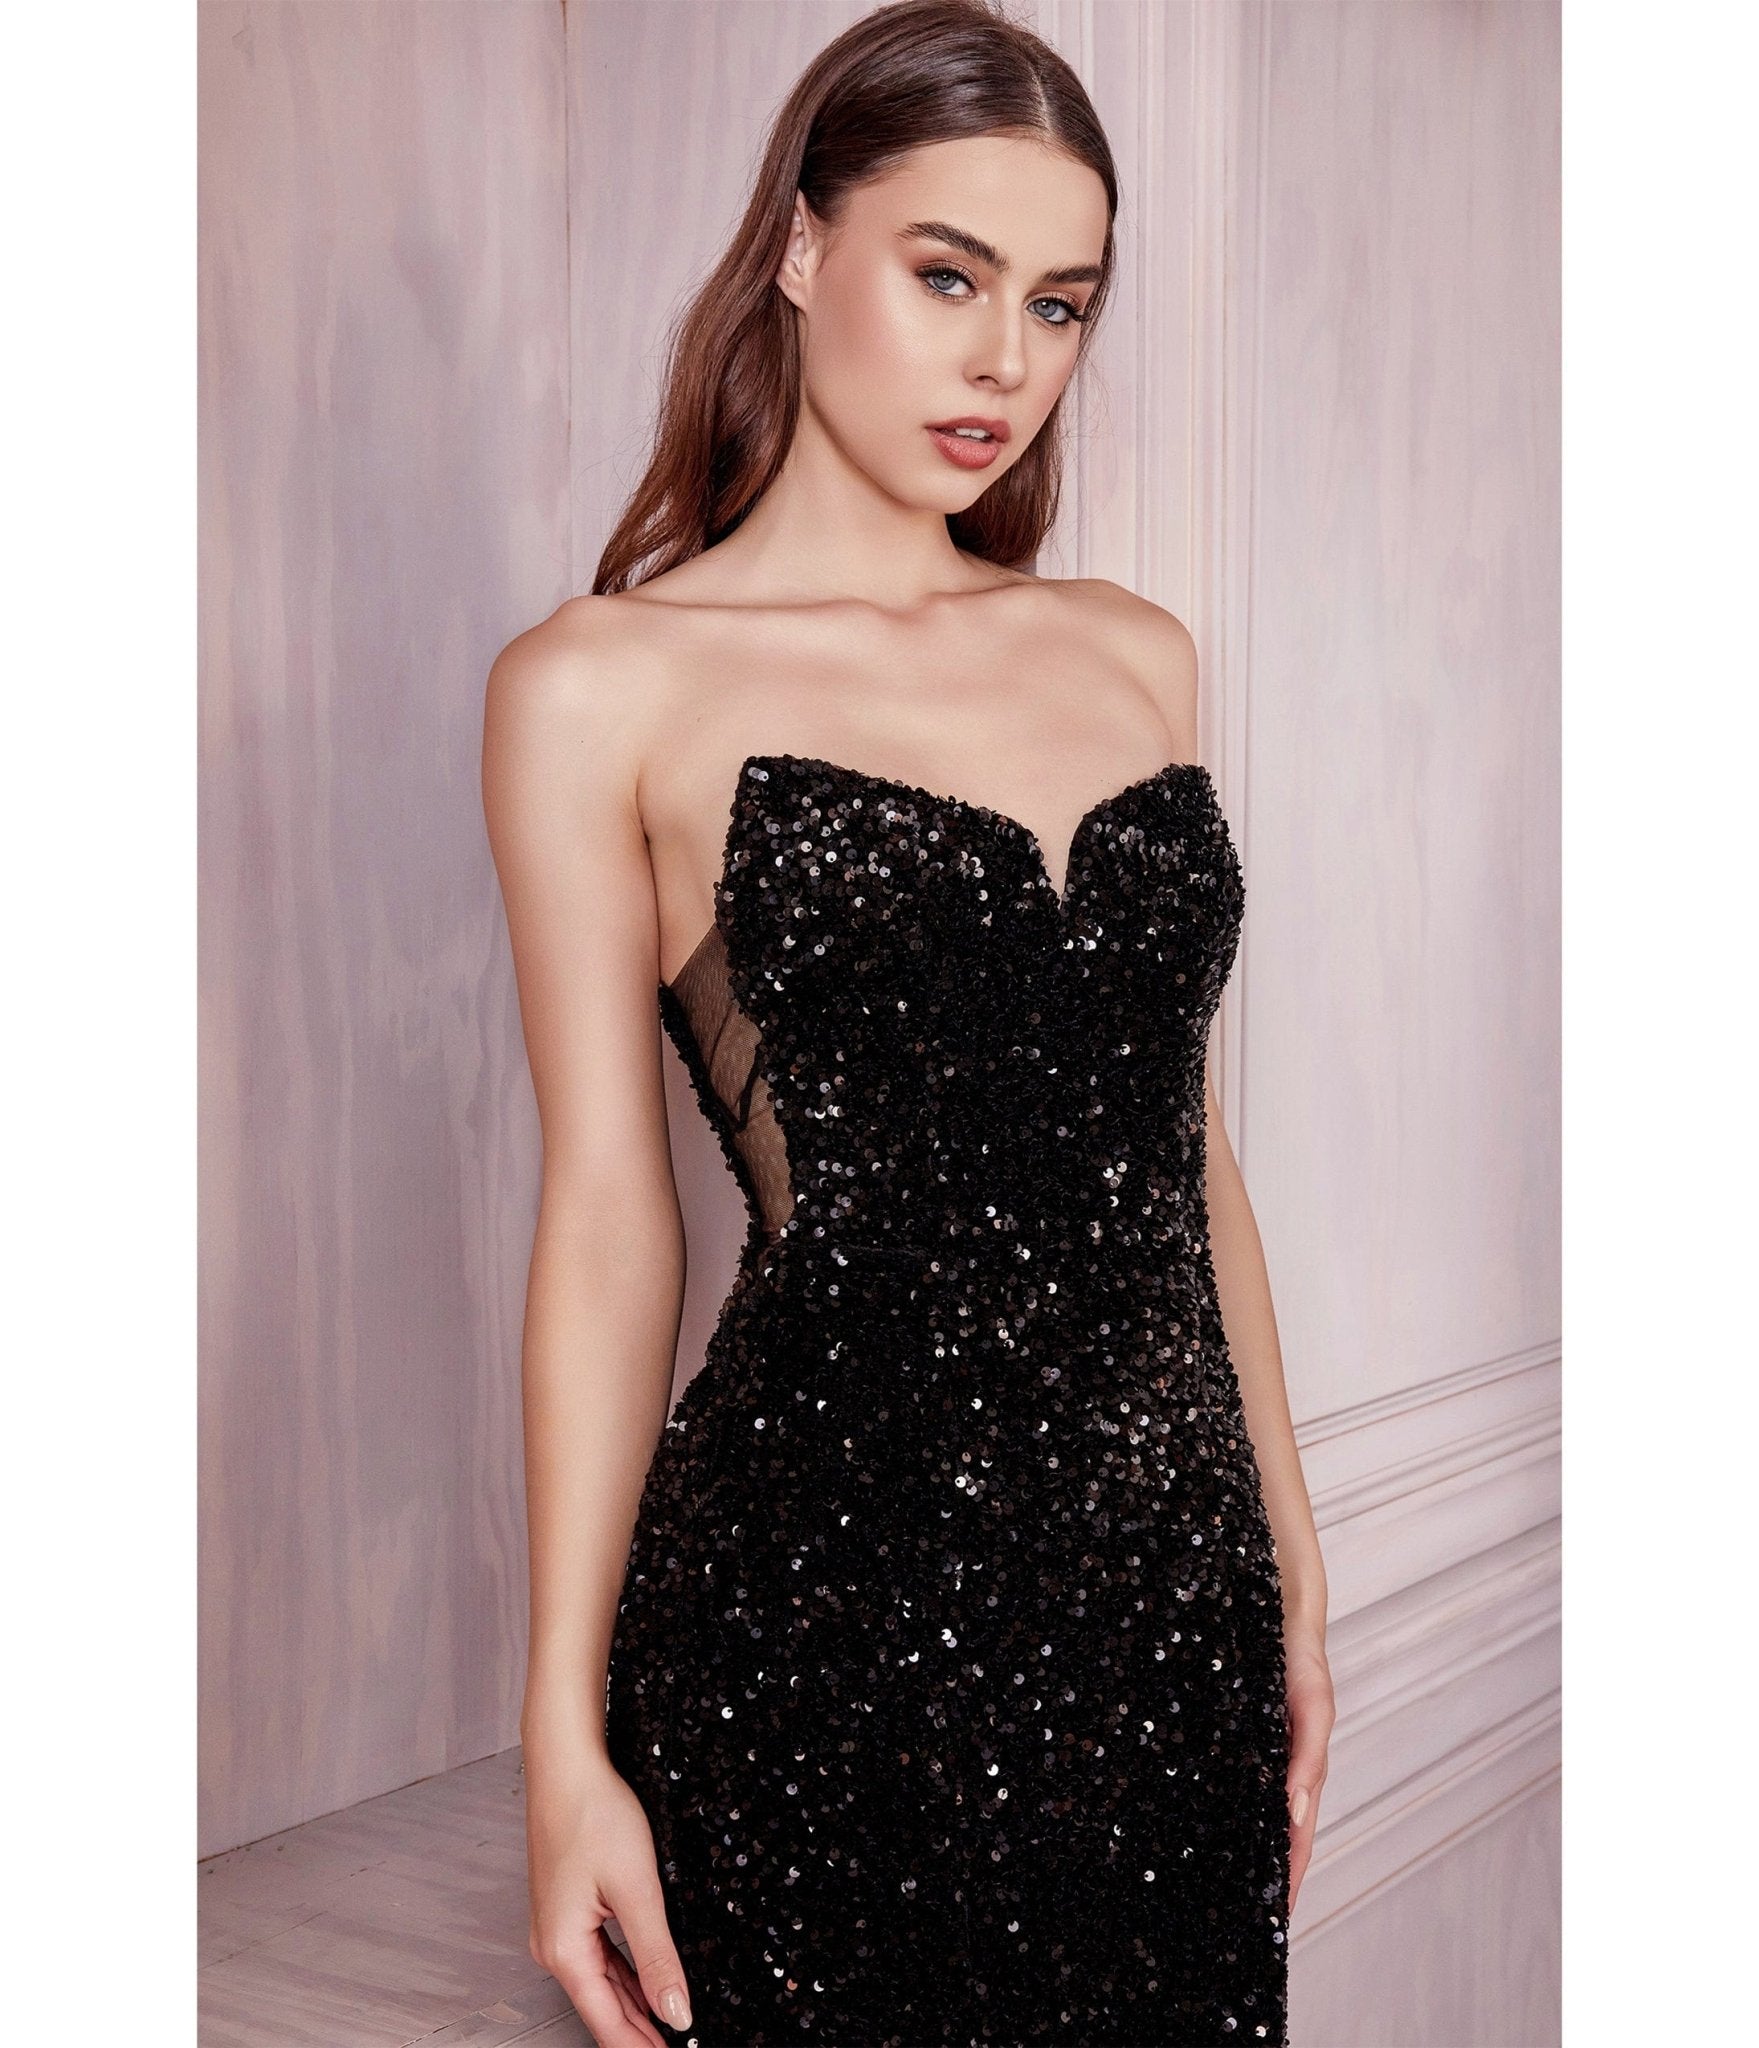 

Show Stopping Black Strapless Sequin Bridesmaid Gown